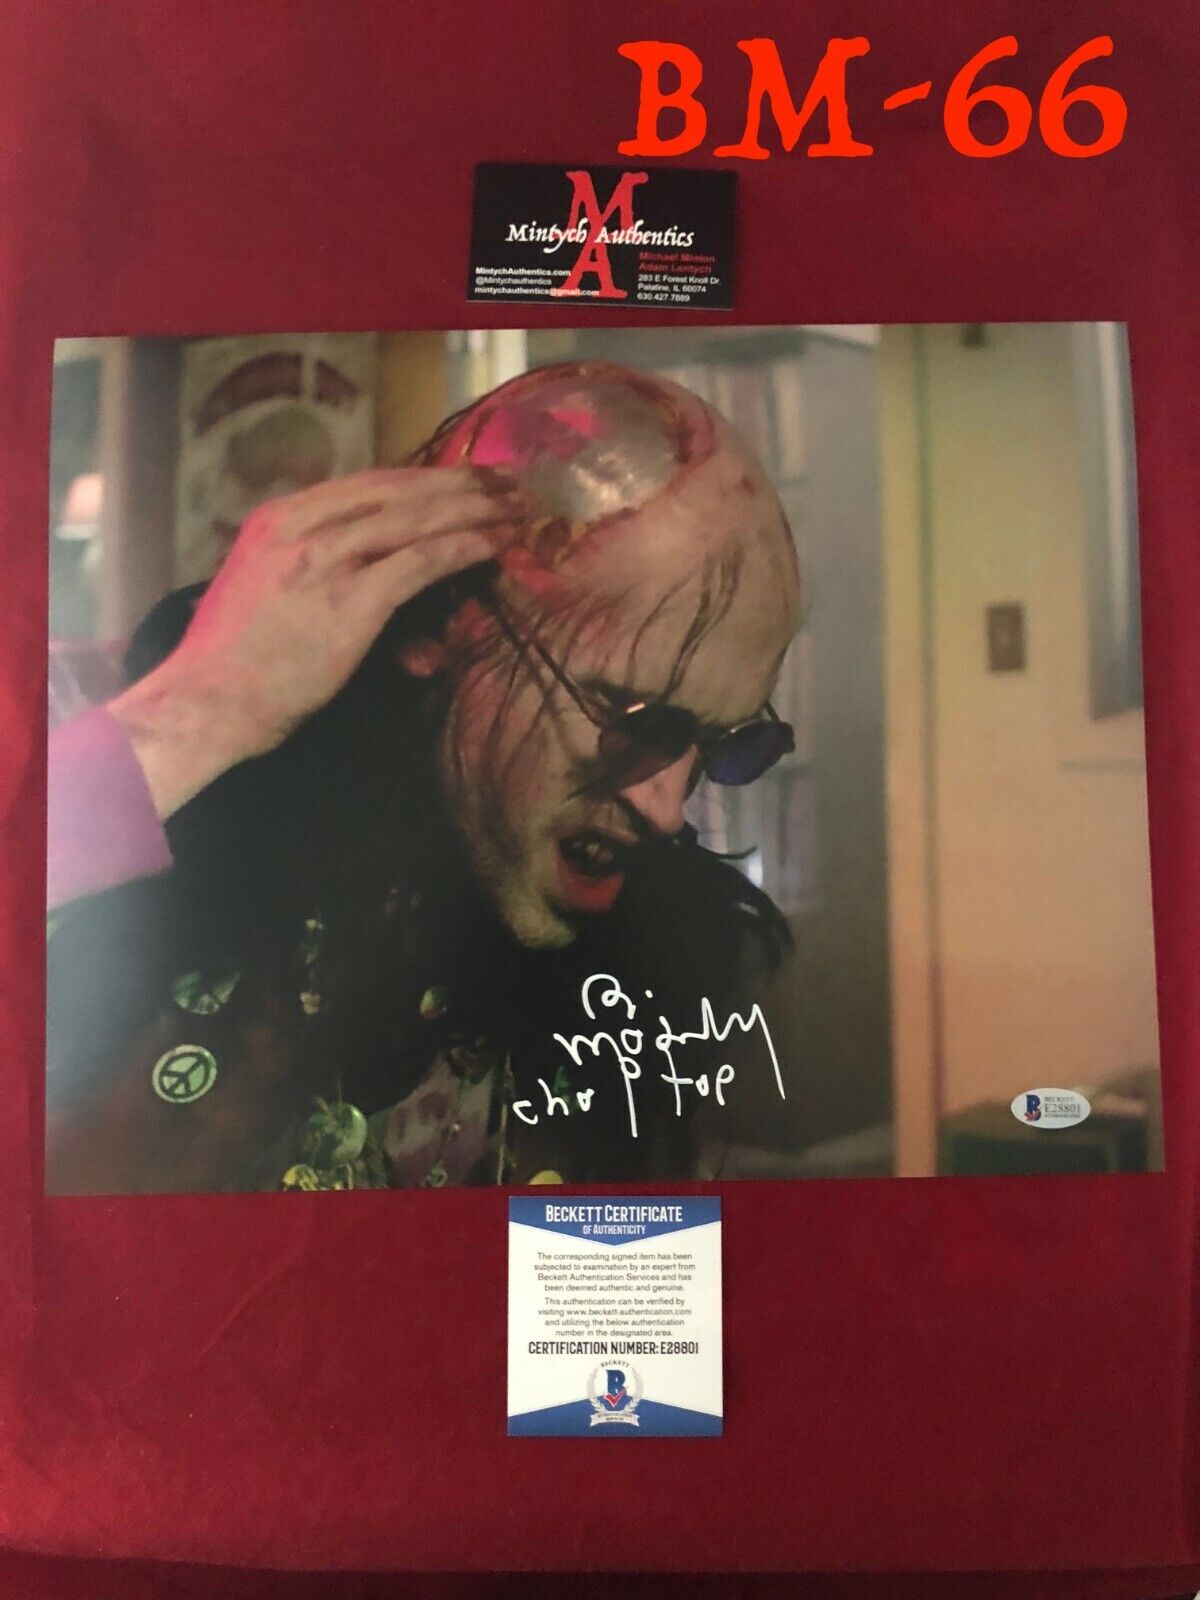 BILL MOSELEY AUTO SIGNED 11x14 Photo Poster painting! TEXAS CHAINSAW MASSACRE! CHOP TOP! HORROR!